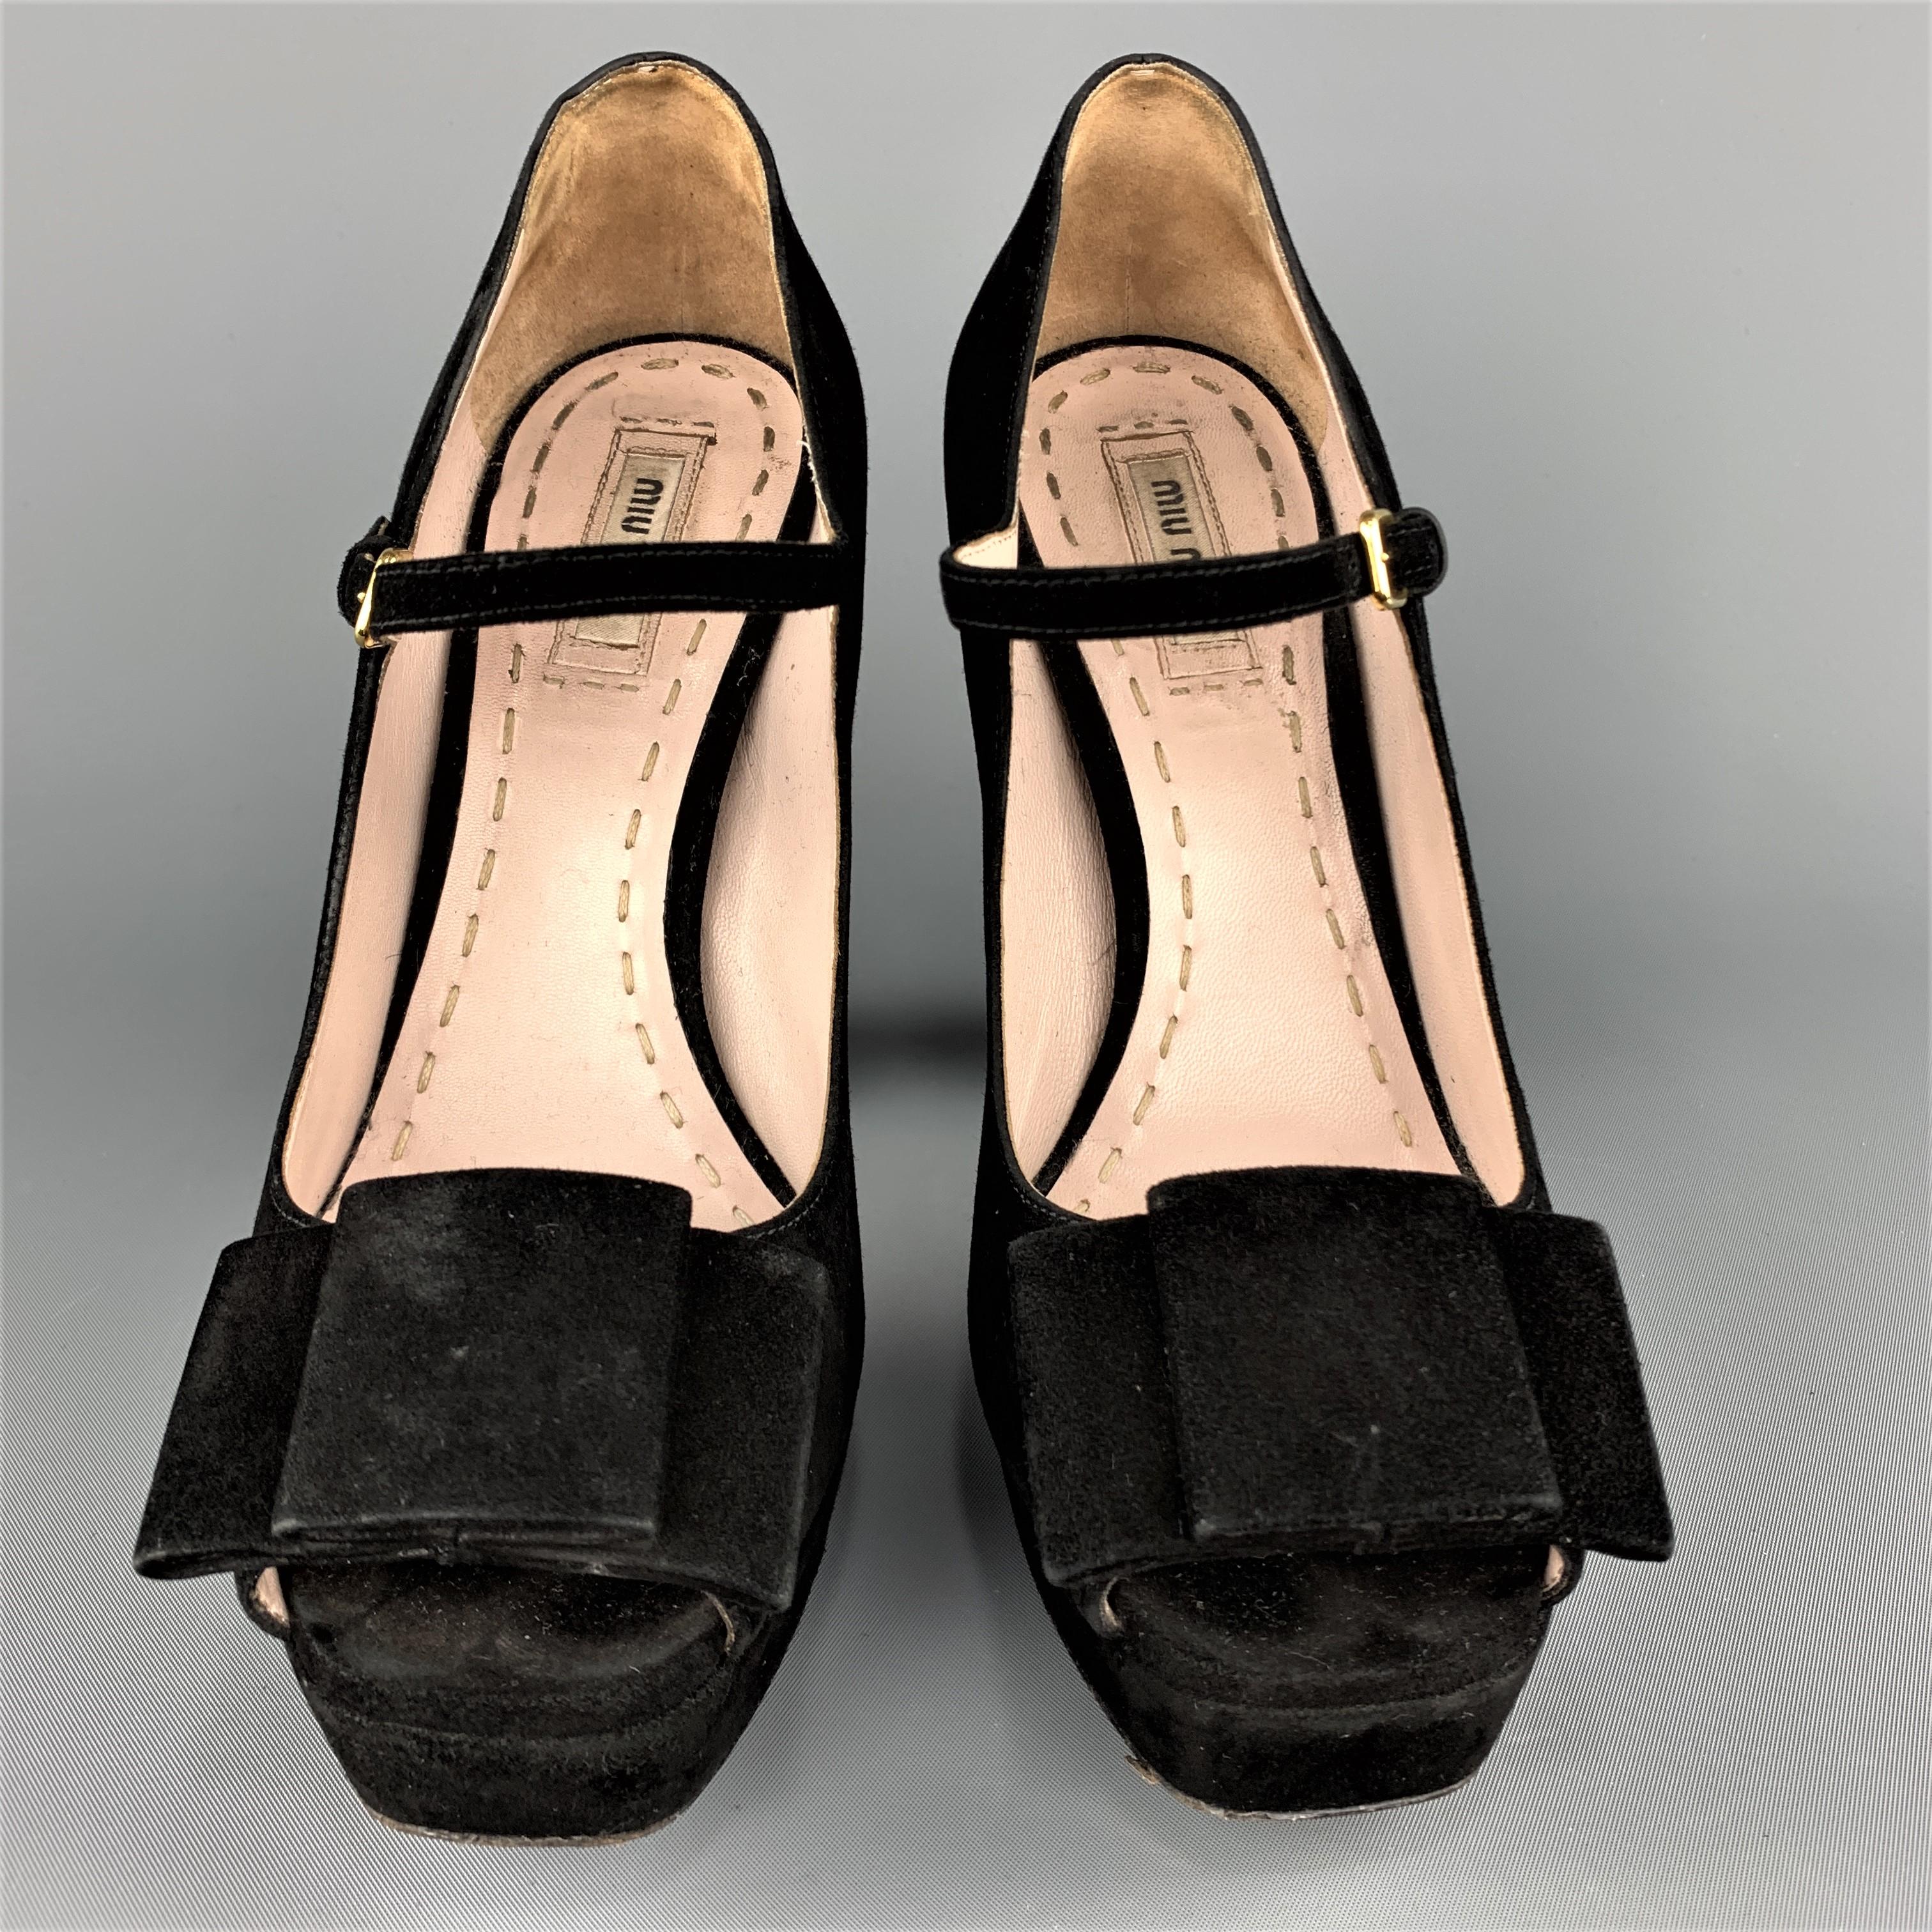 MIU MIU pumps come in black suede with a chunky covered heel, peep toe, bow detail, and Mary Jane strap. Wear throughout. Made in Italy.
 
Good Pre-Owned Condition.
Marked: IT 38
 
Measurements:
 
Heel: 5 in.
Platform: 1 in.